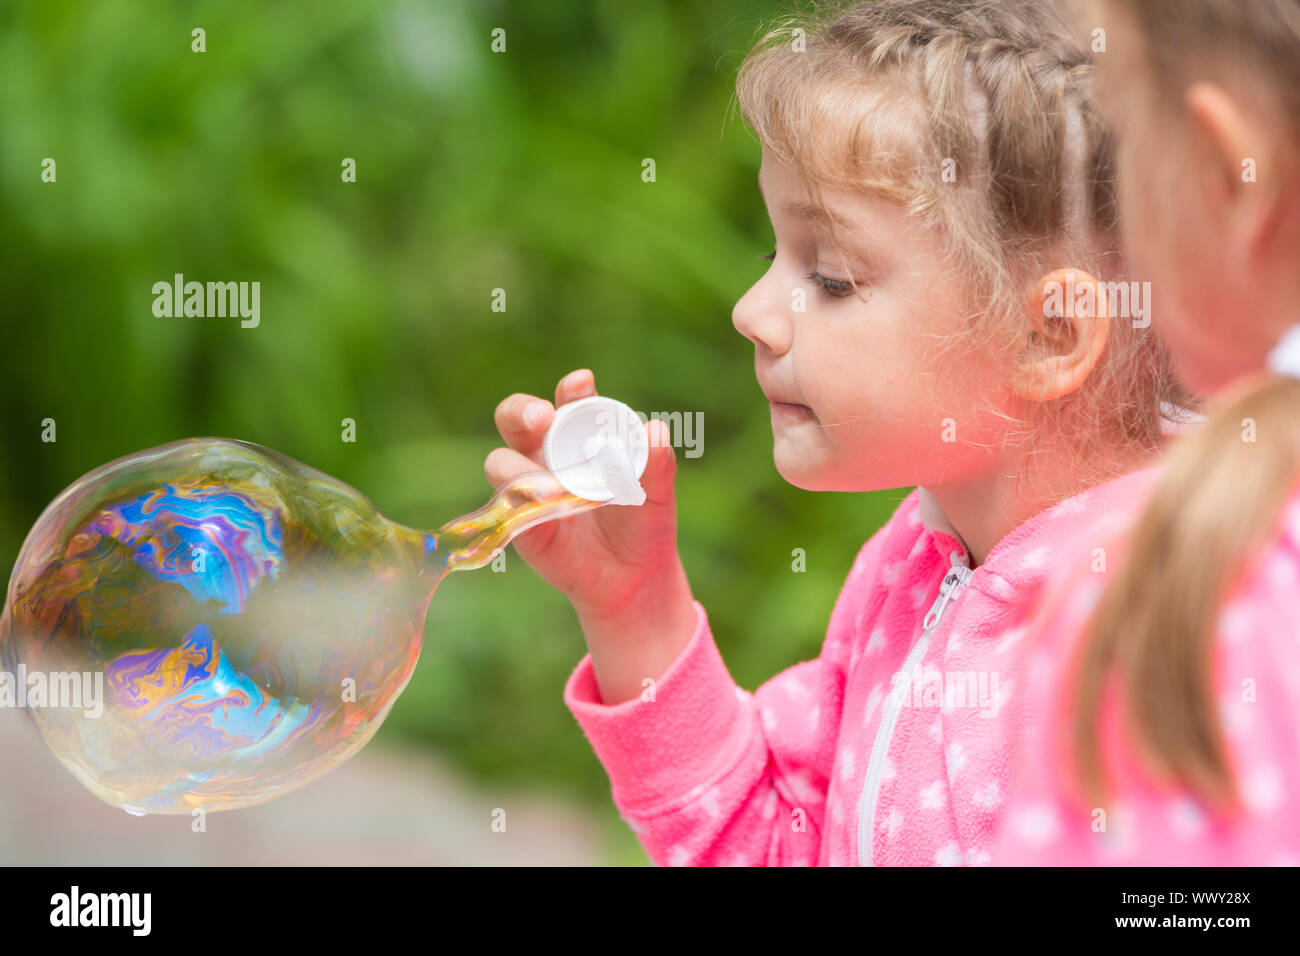 Five-year girl inflates a large bubble, another girl with interest looks at her Stock Photo